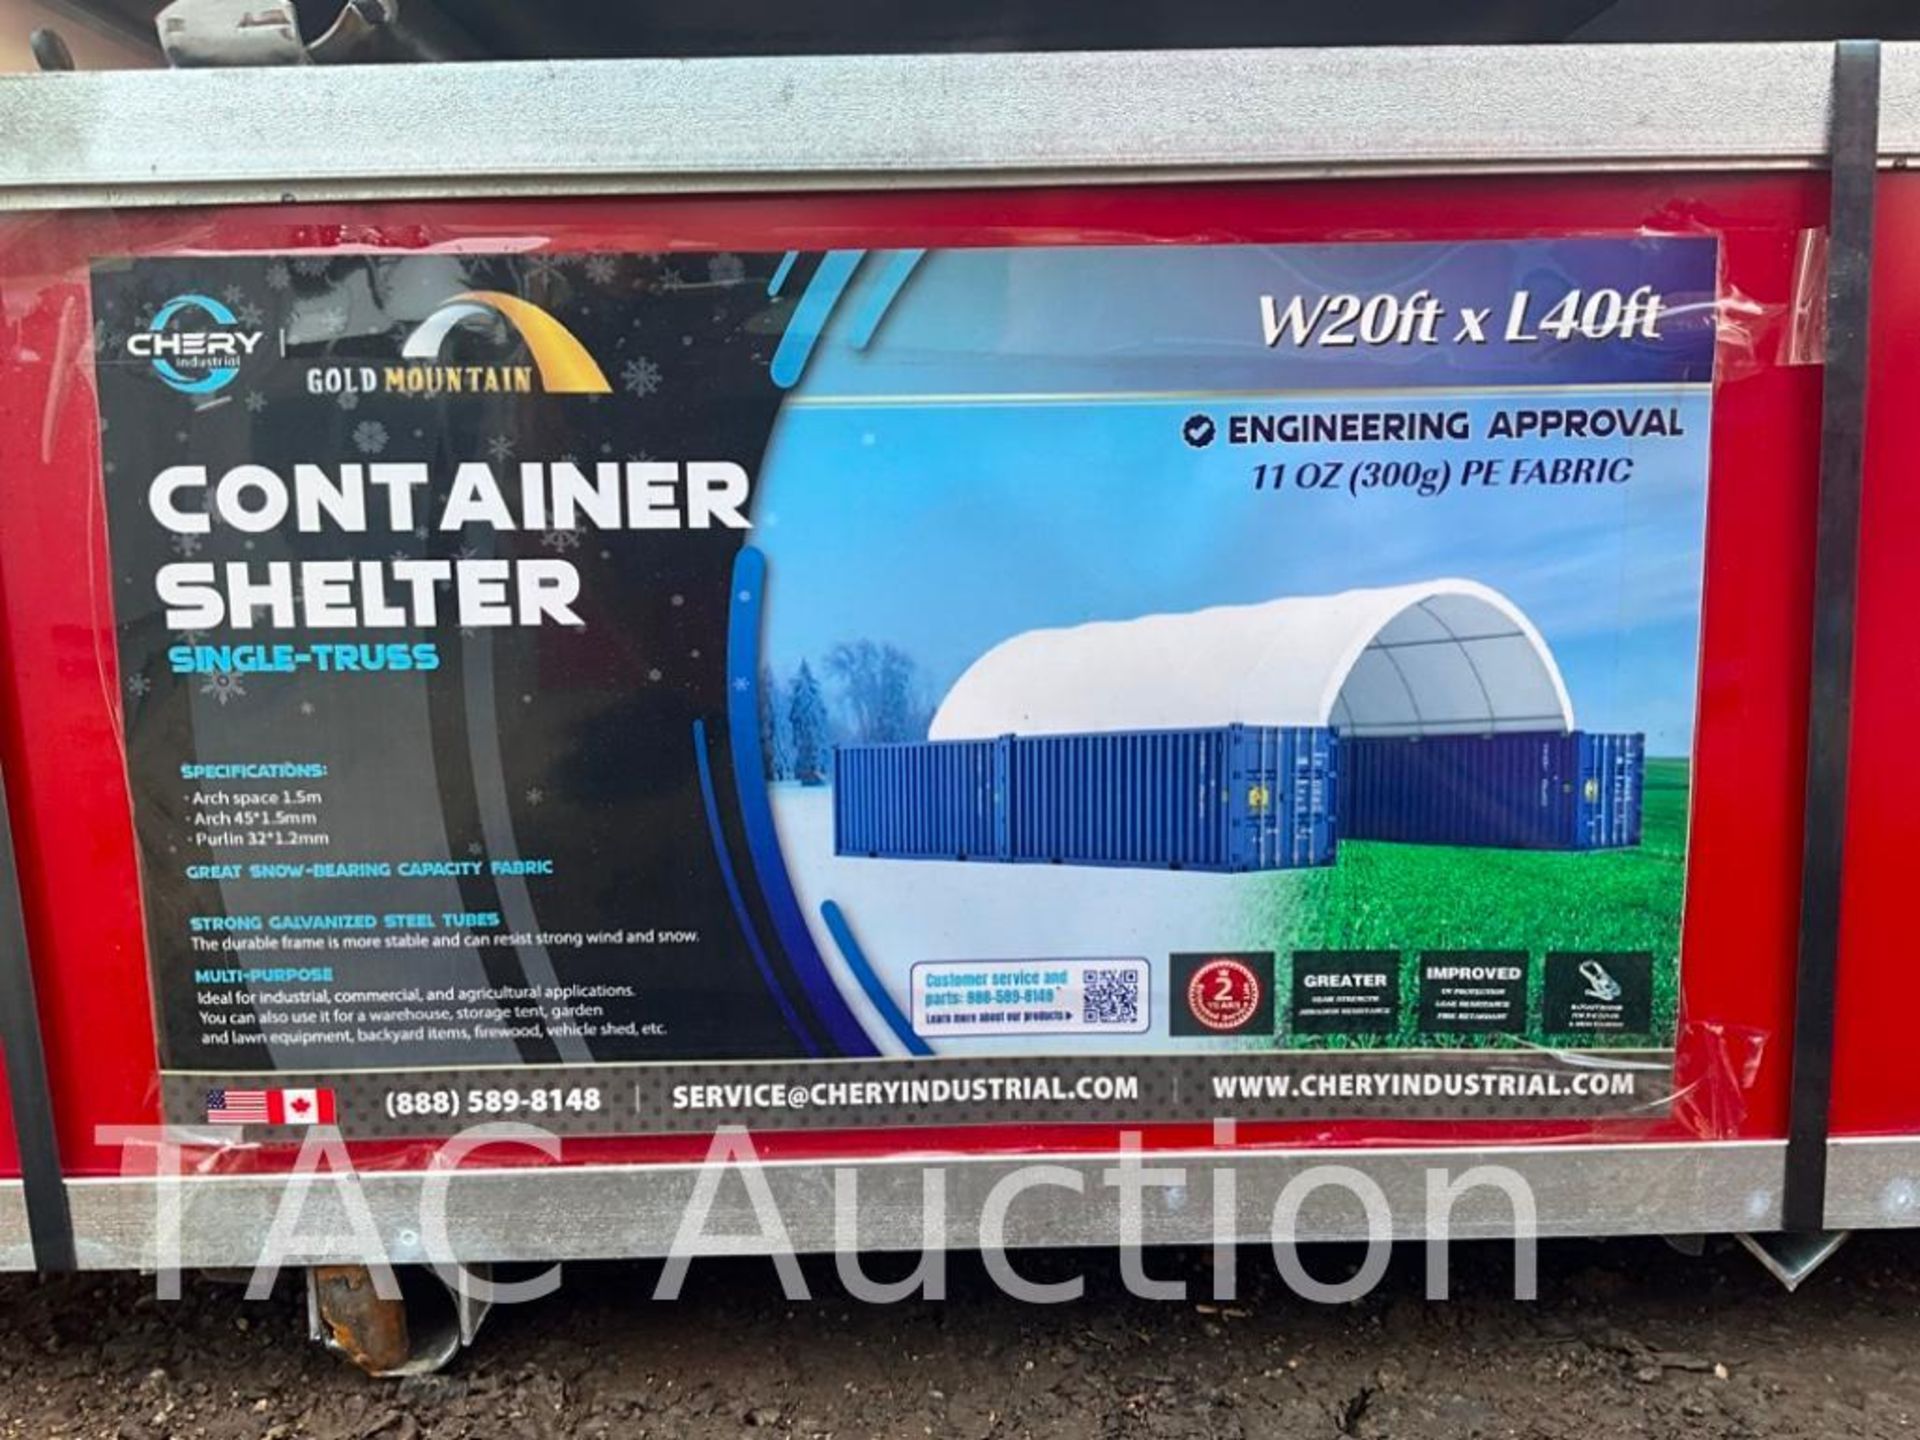 New 2023 Chery Industrial 20X40 Container Shelter